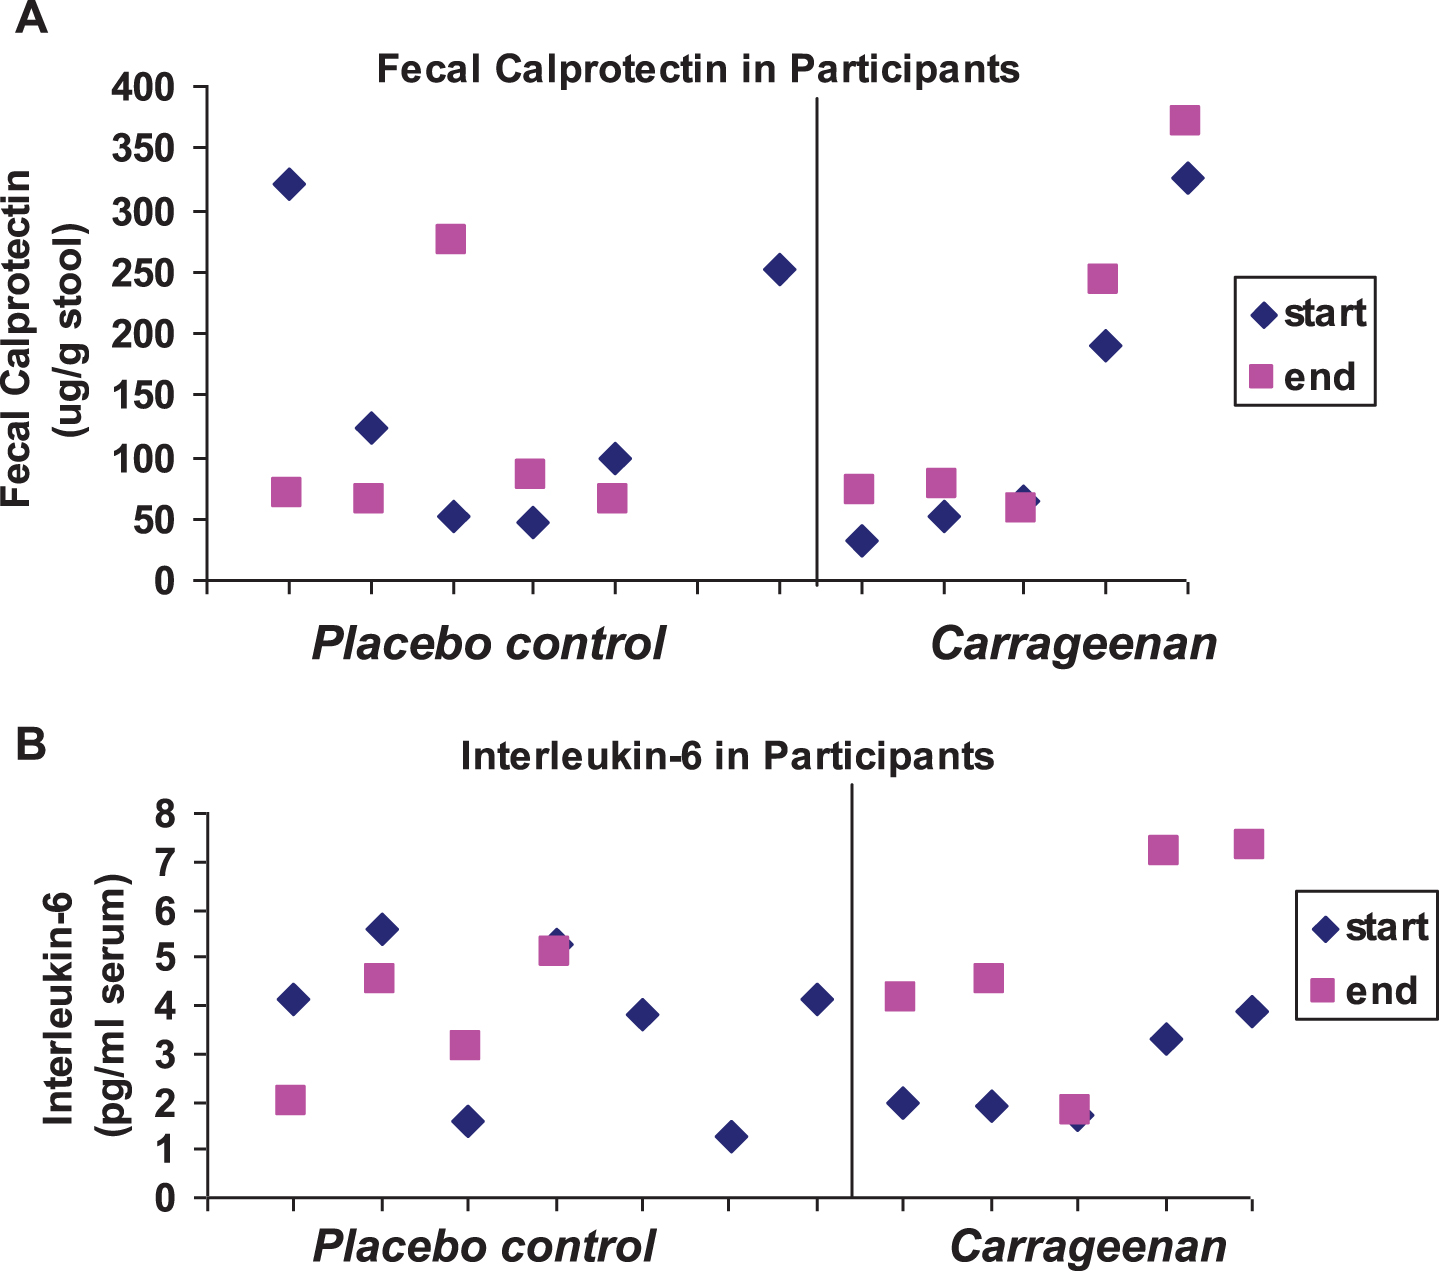 Scatterplot of fecal calprotectin and Interleukin-6. (A) The initial and final values for fecal calprotectin are shown in the scatterplot by placebo controls and carrageenan-exposed participants. Two of the controls and four of the carrageenan-exposed subjects had increases (p = 0.06 for carrageenan-exposed group, paired t-test, two-tailed; n = 5). (B) Interleukin-6 values for the study subjects increased in all of the carrageenan-exposed participants and in one of the control subjects (p = 0.02 for carrageenan-exposed group, paired t-test, two-tailed; n = 5).